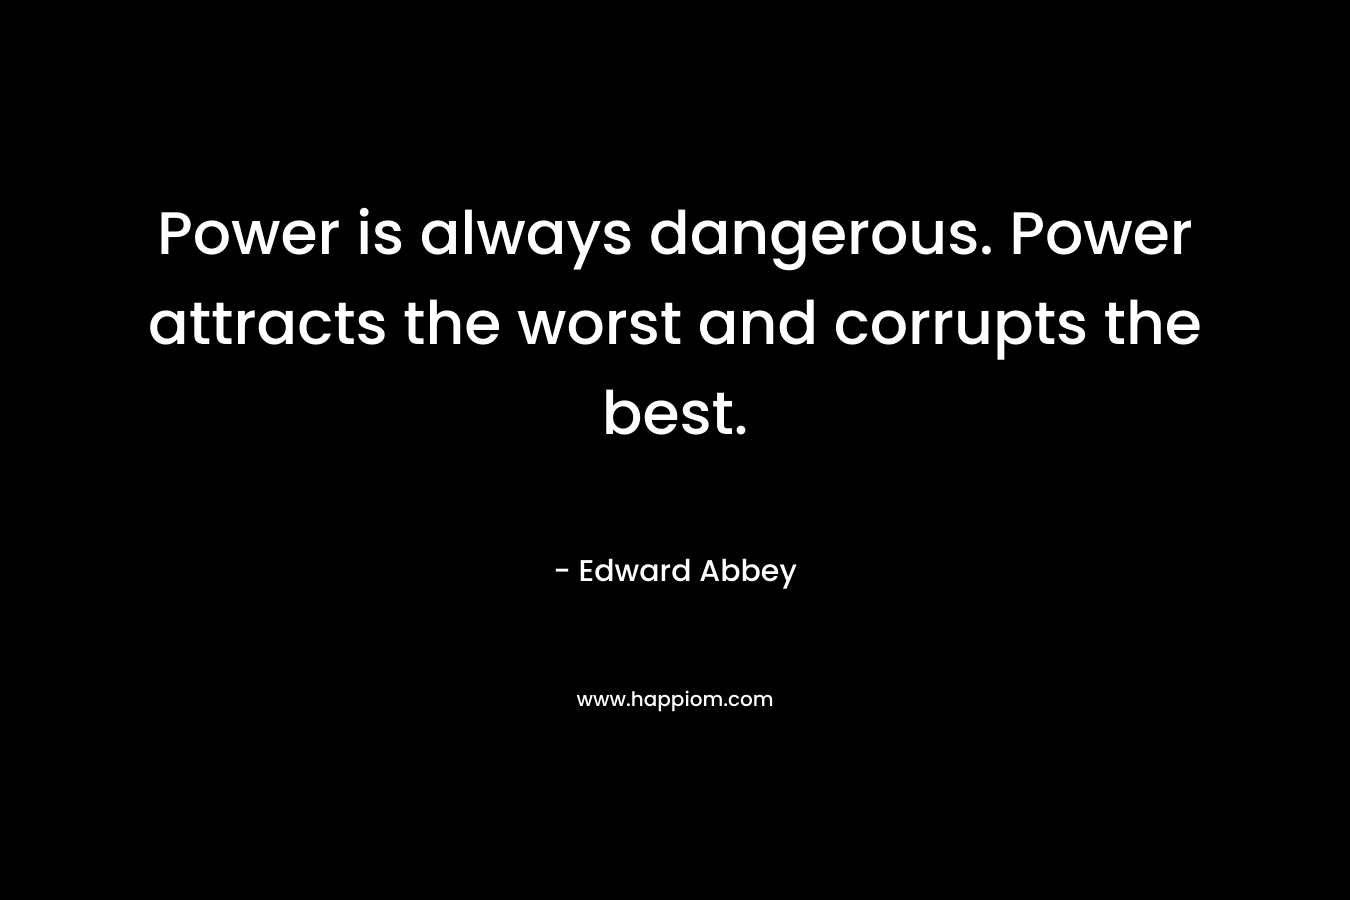 Power is always dangerous. Power attracts the worst and corrupts the best.